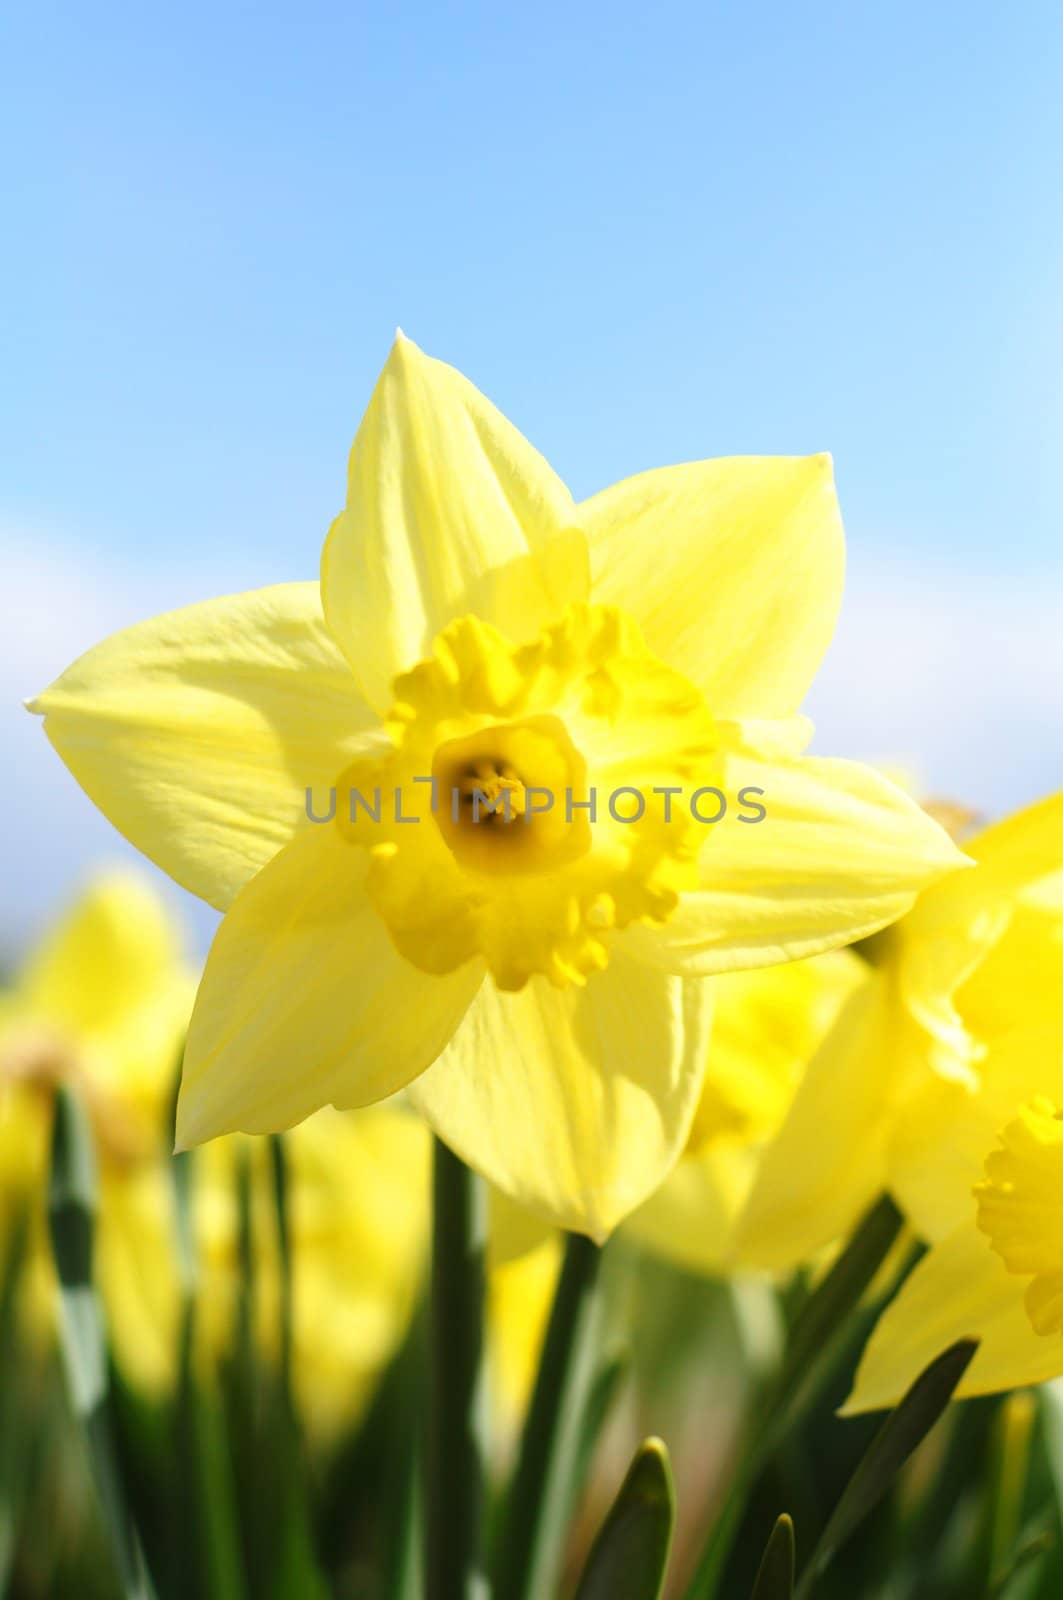 yellow daff or jonquil flower in spring with copyspace showing summer concept